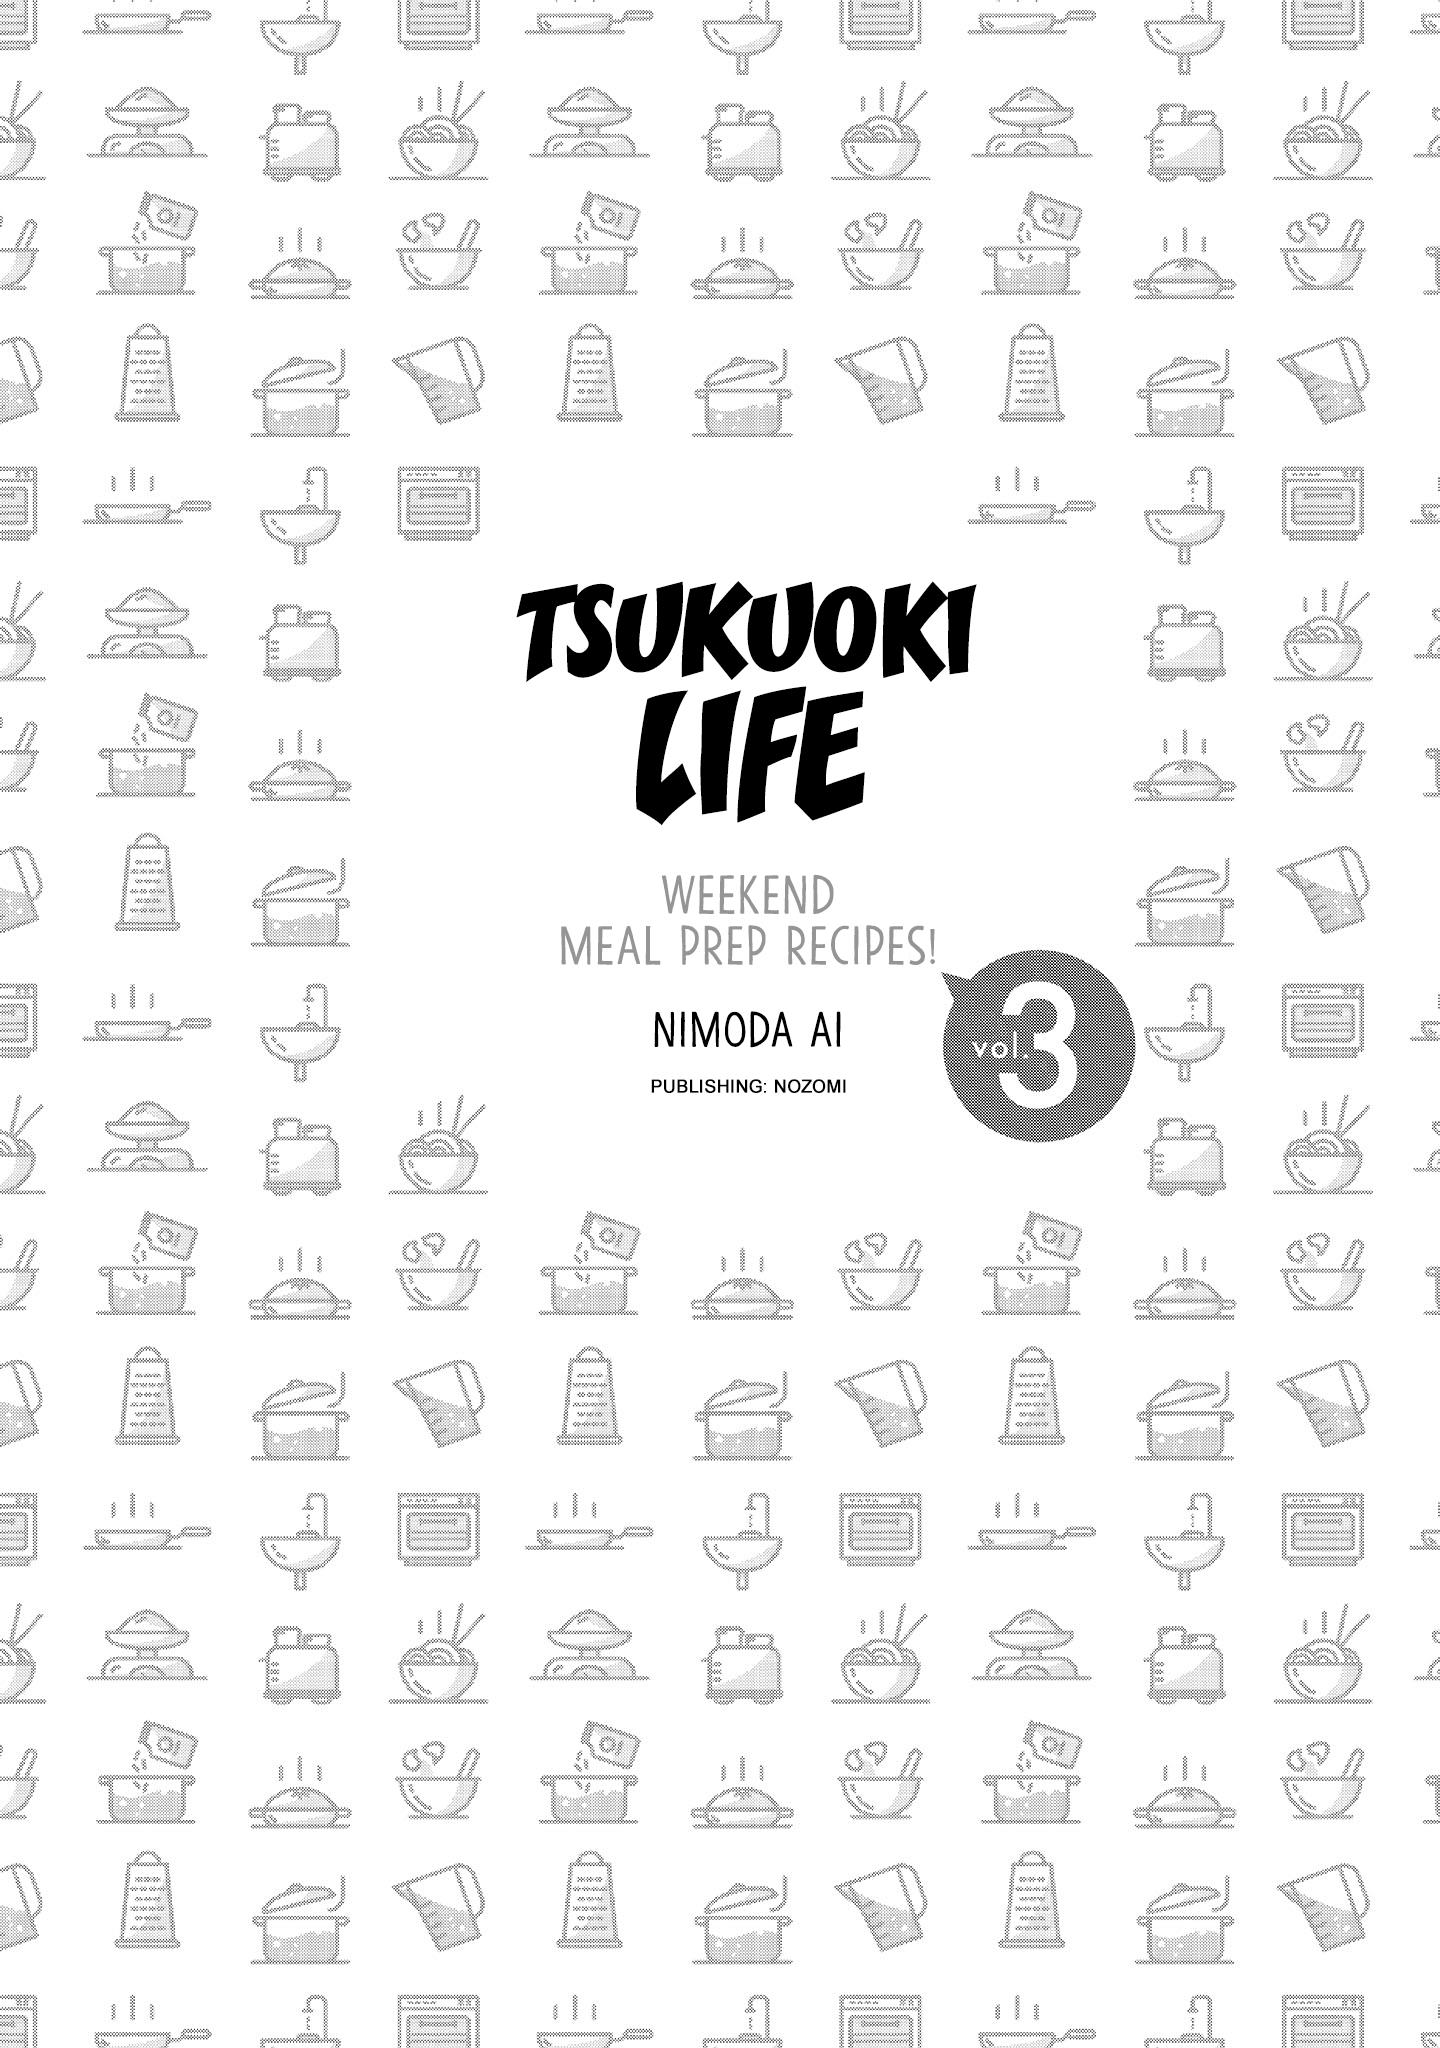 Tsukuoki Life: Weekend Meal Prep Recipes! Vol.3 Chapter 15: The Taste Of Autumn ☆ Simmered Satsumaimo With Lemon And Sweet & Spicy Pork Stir Fry - Picture 3